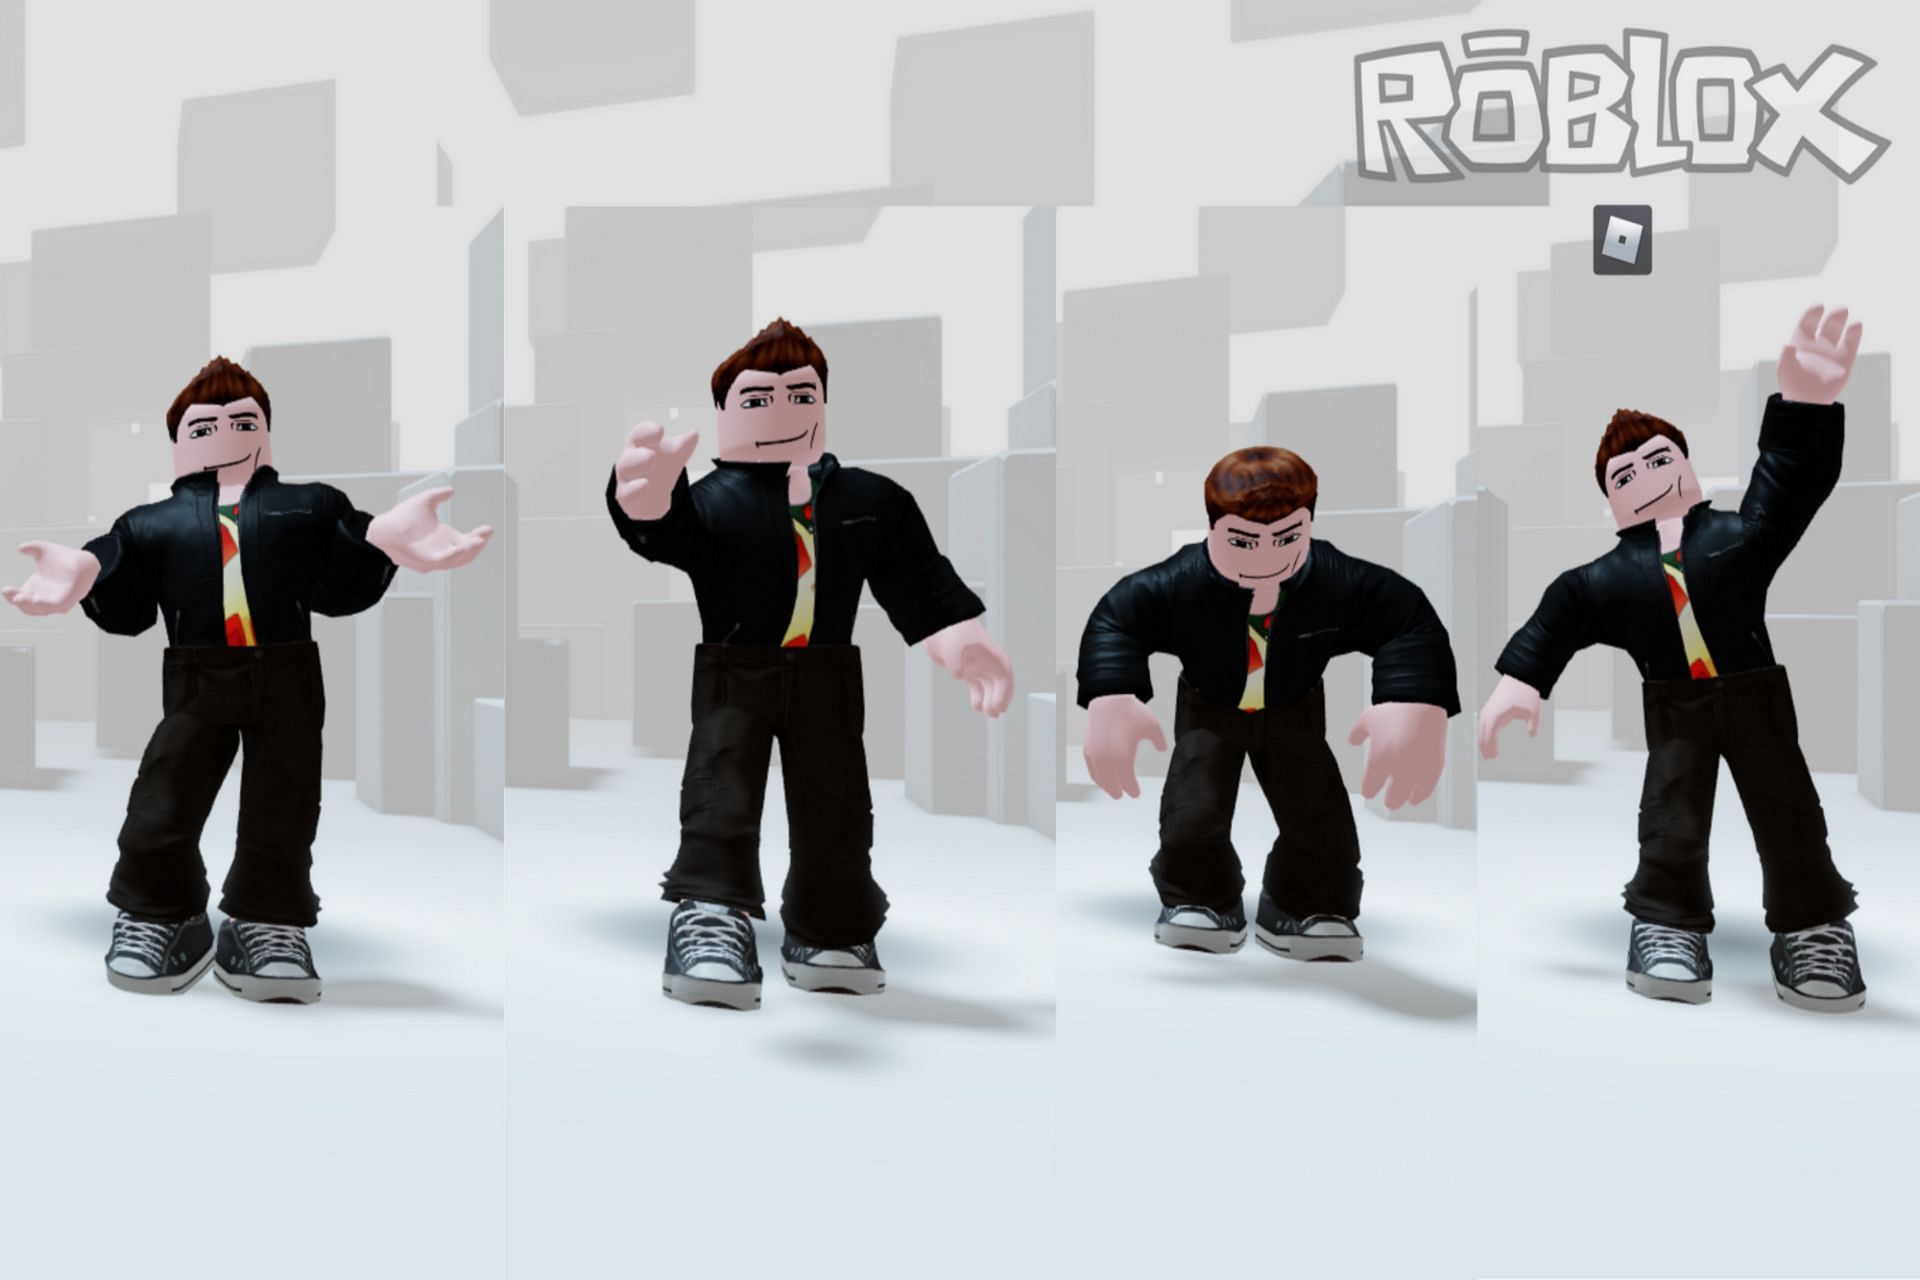 How to change your avatar profile picture on Roblox